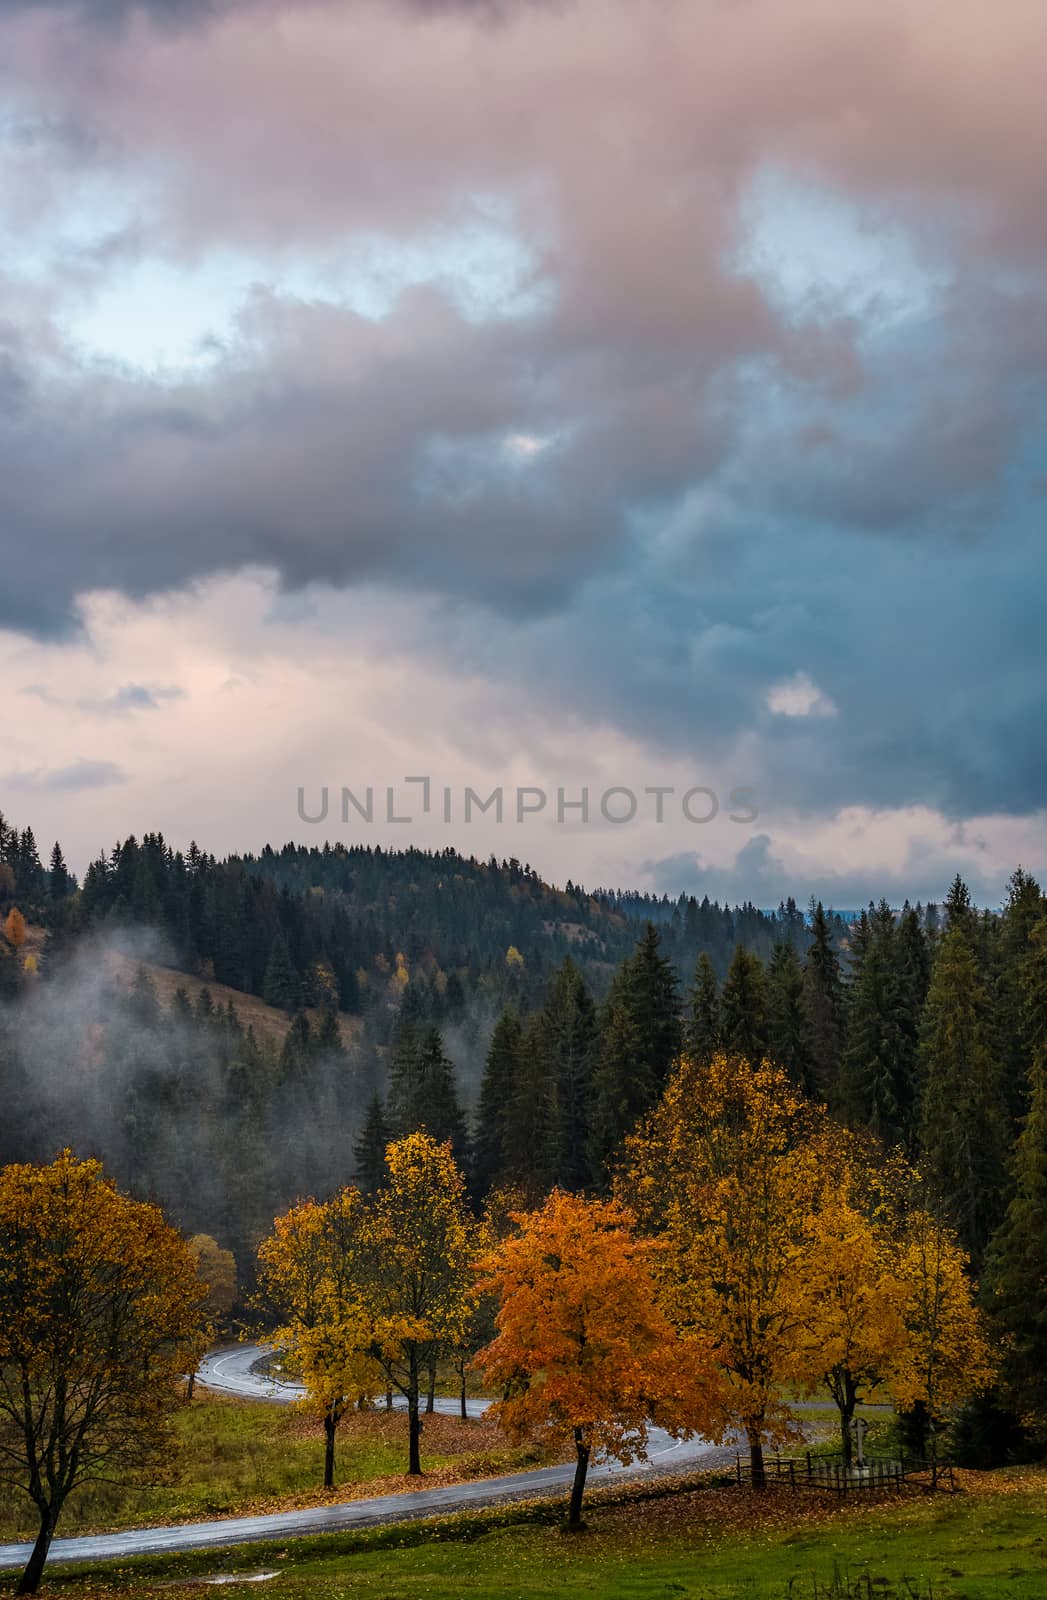 winding road through forest in autumn evening with gorgeous cloudy sky. beautiful nature scenery